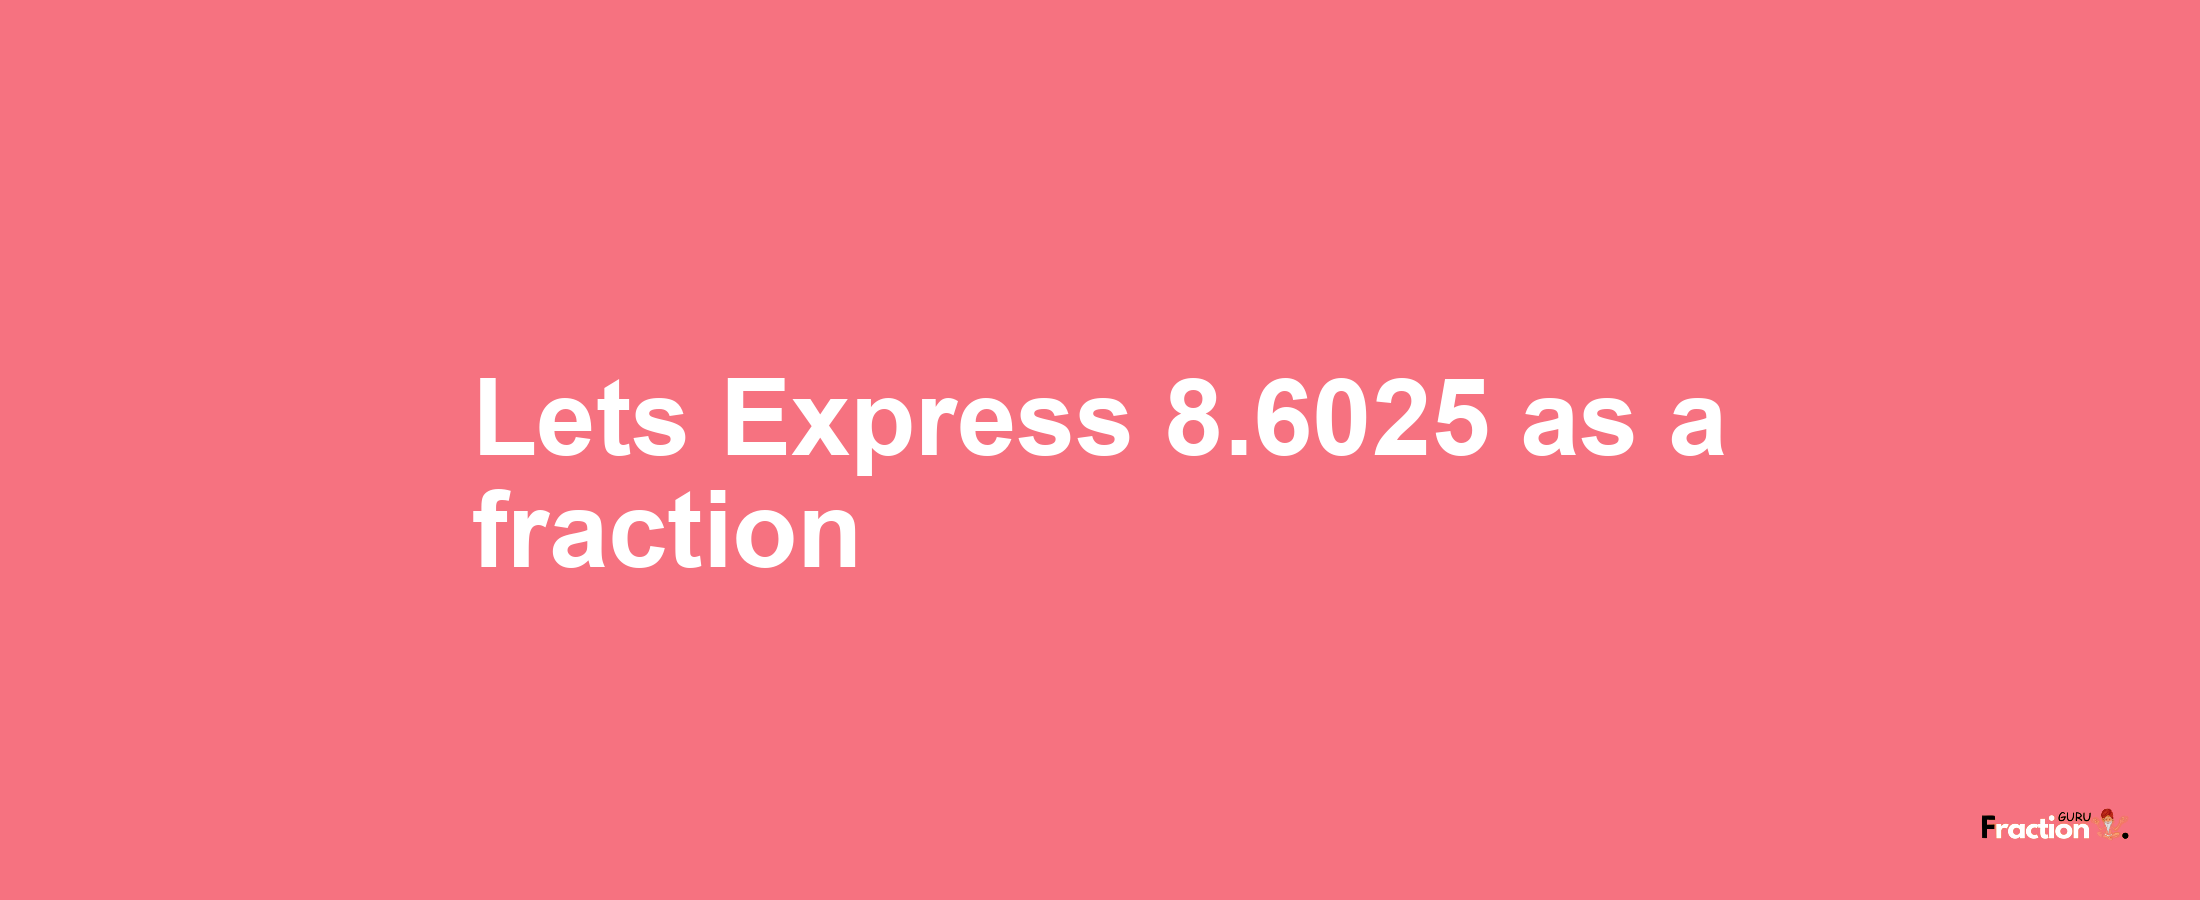 Lets Express 8.6025 as afraction